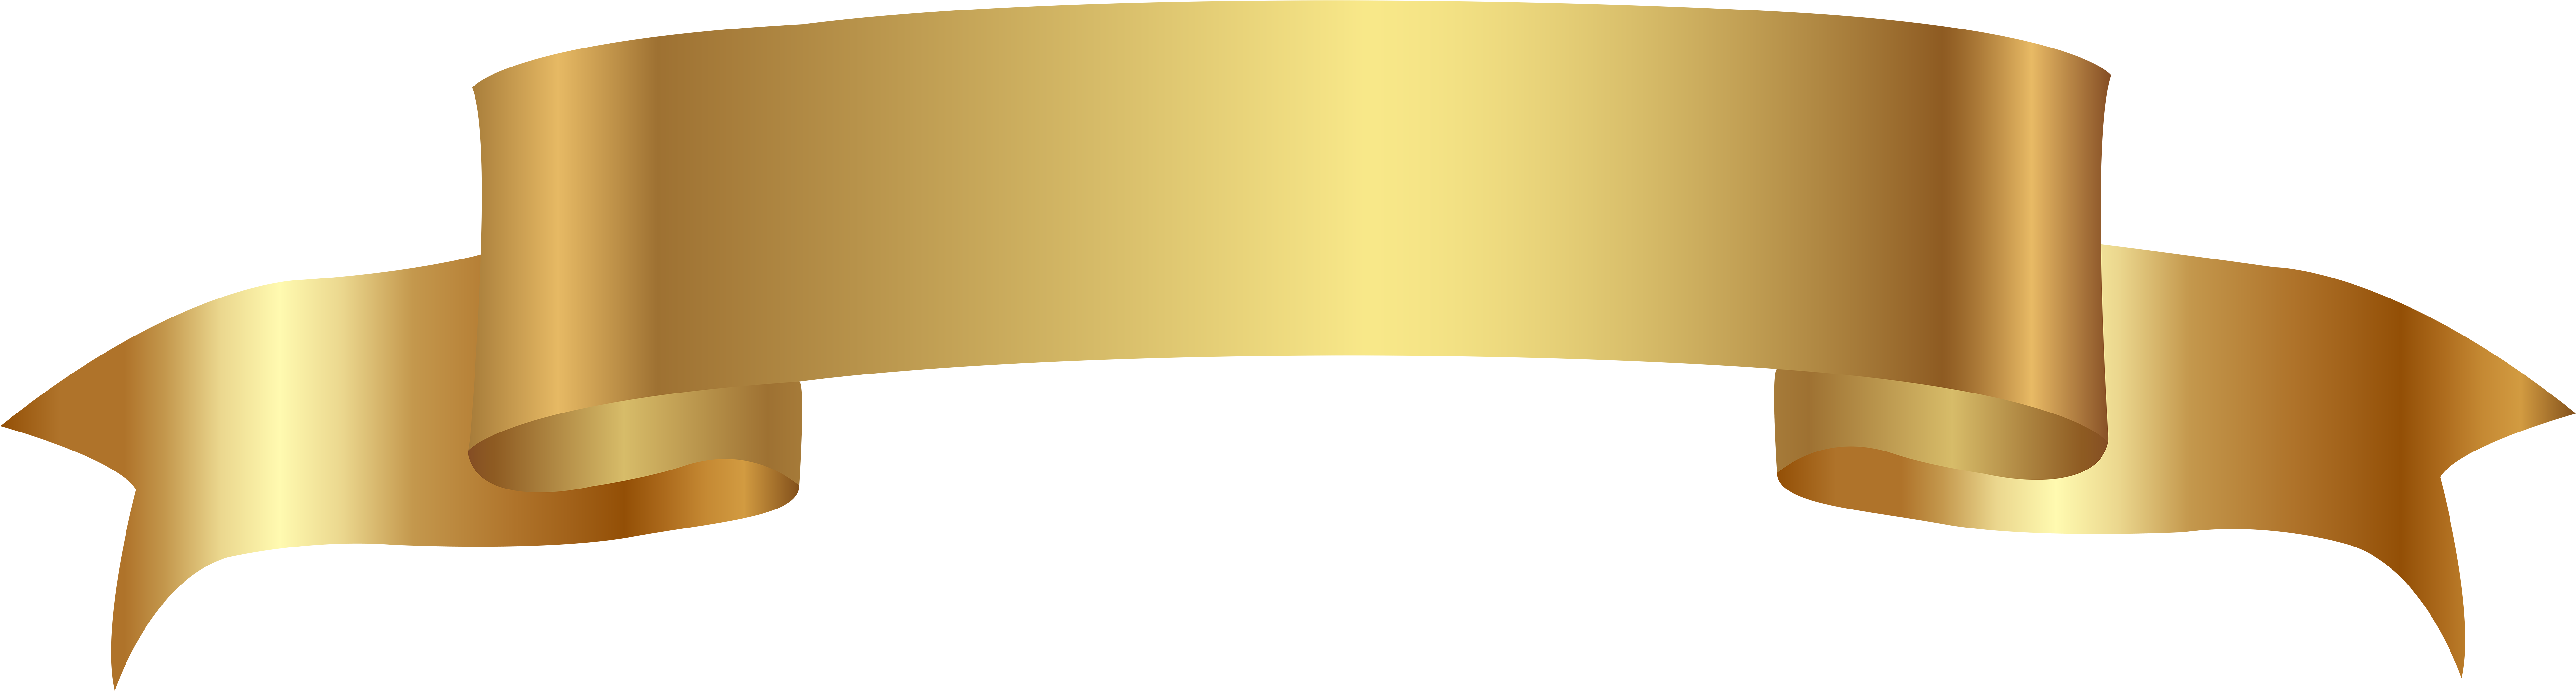 Gold Banner Png 7861 X 2109